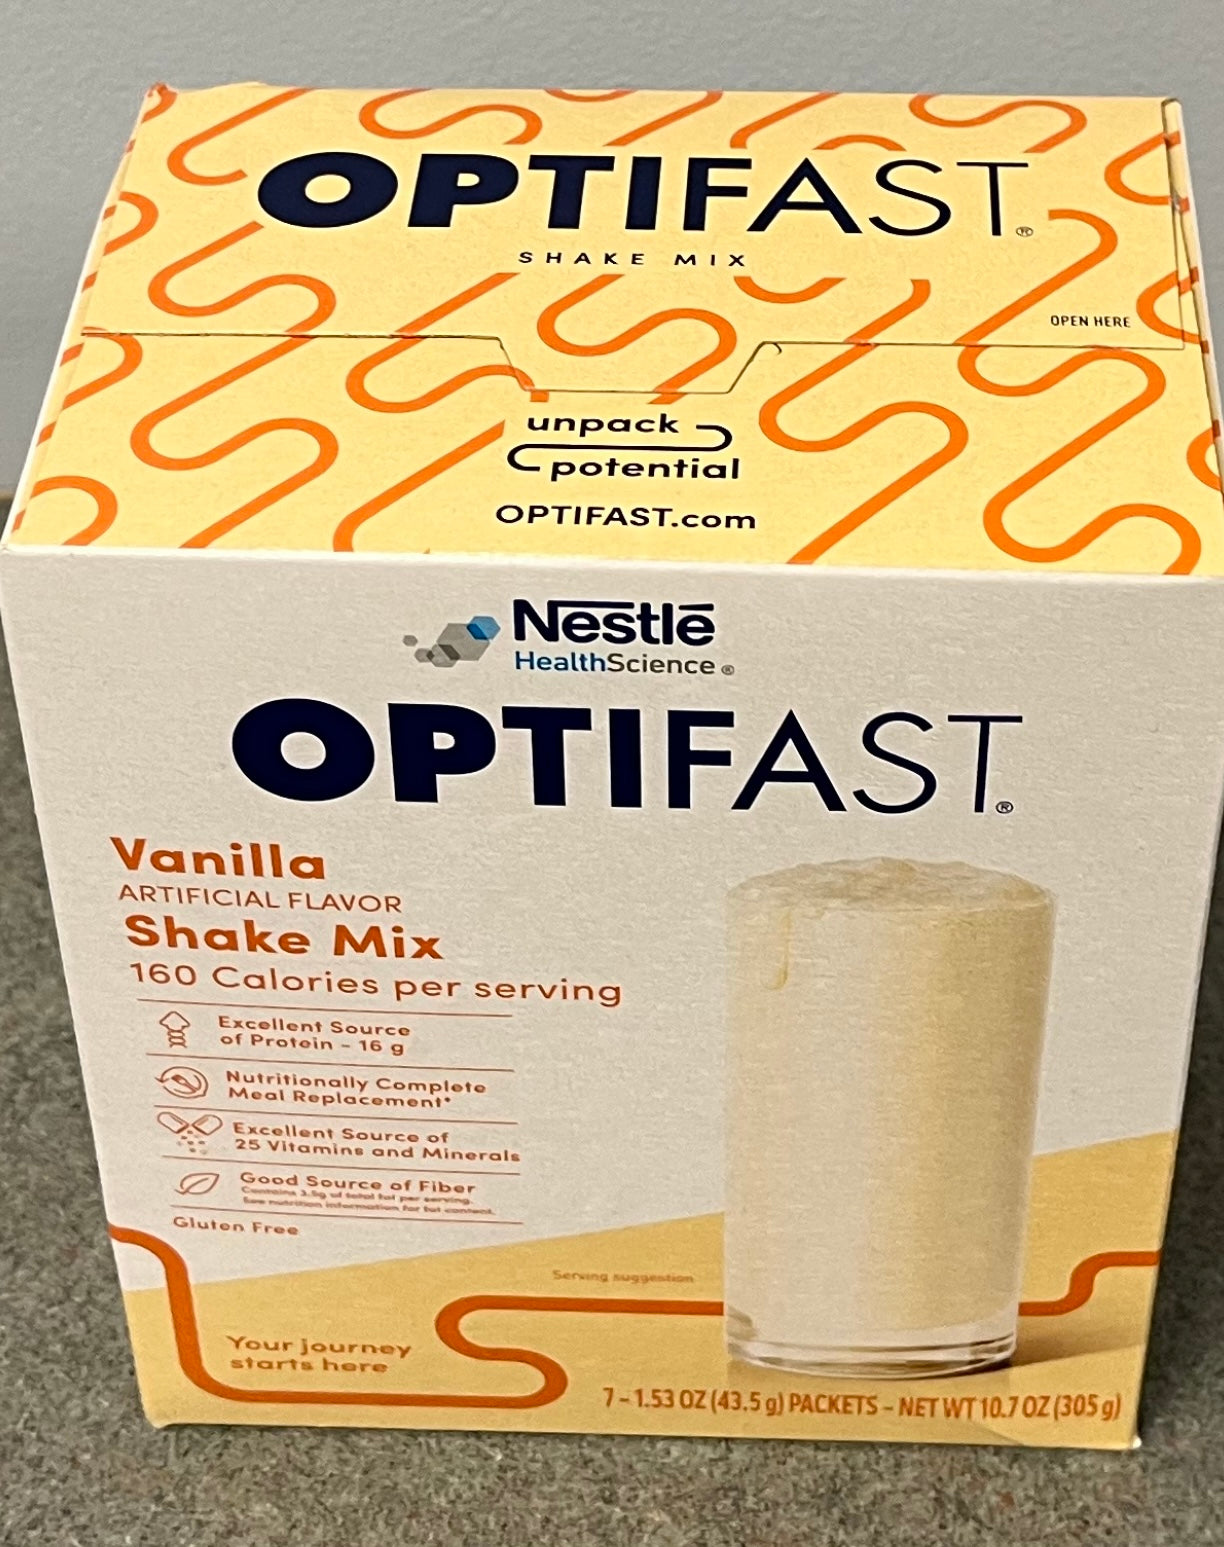 OPTIFAST® Shake Mix (1 box contains 7 packets.)